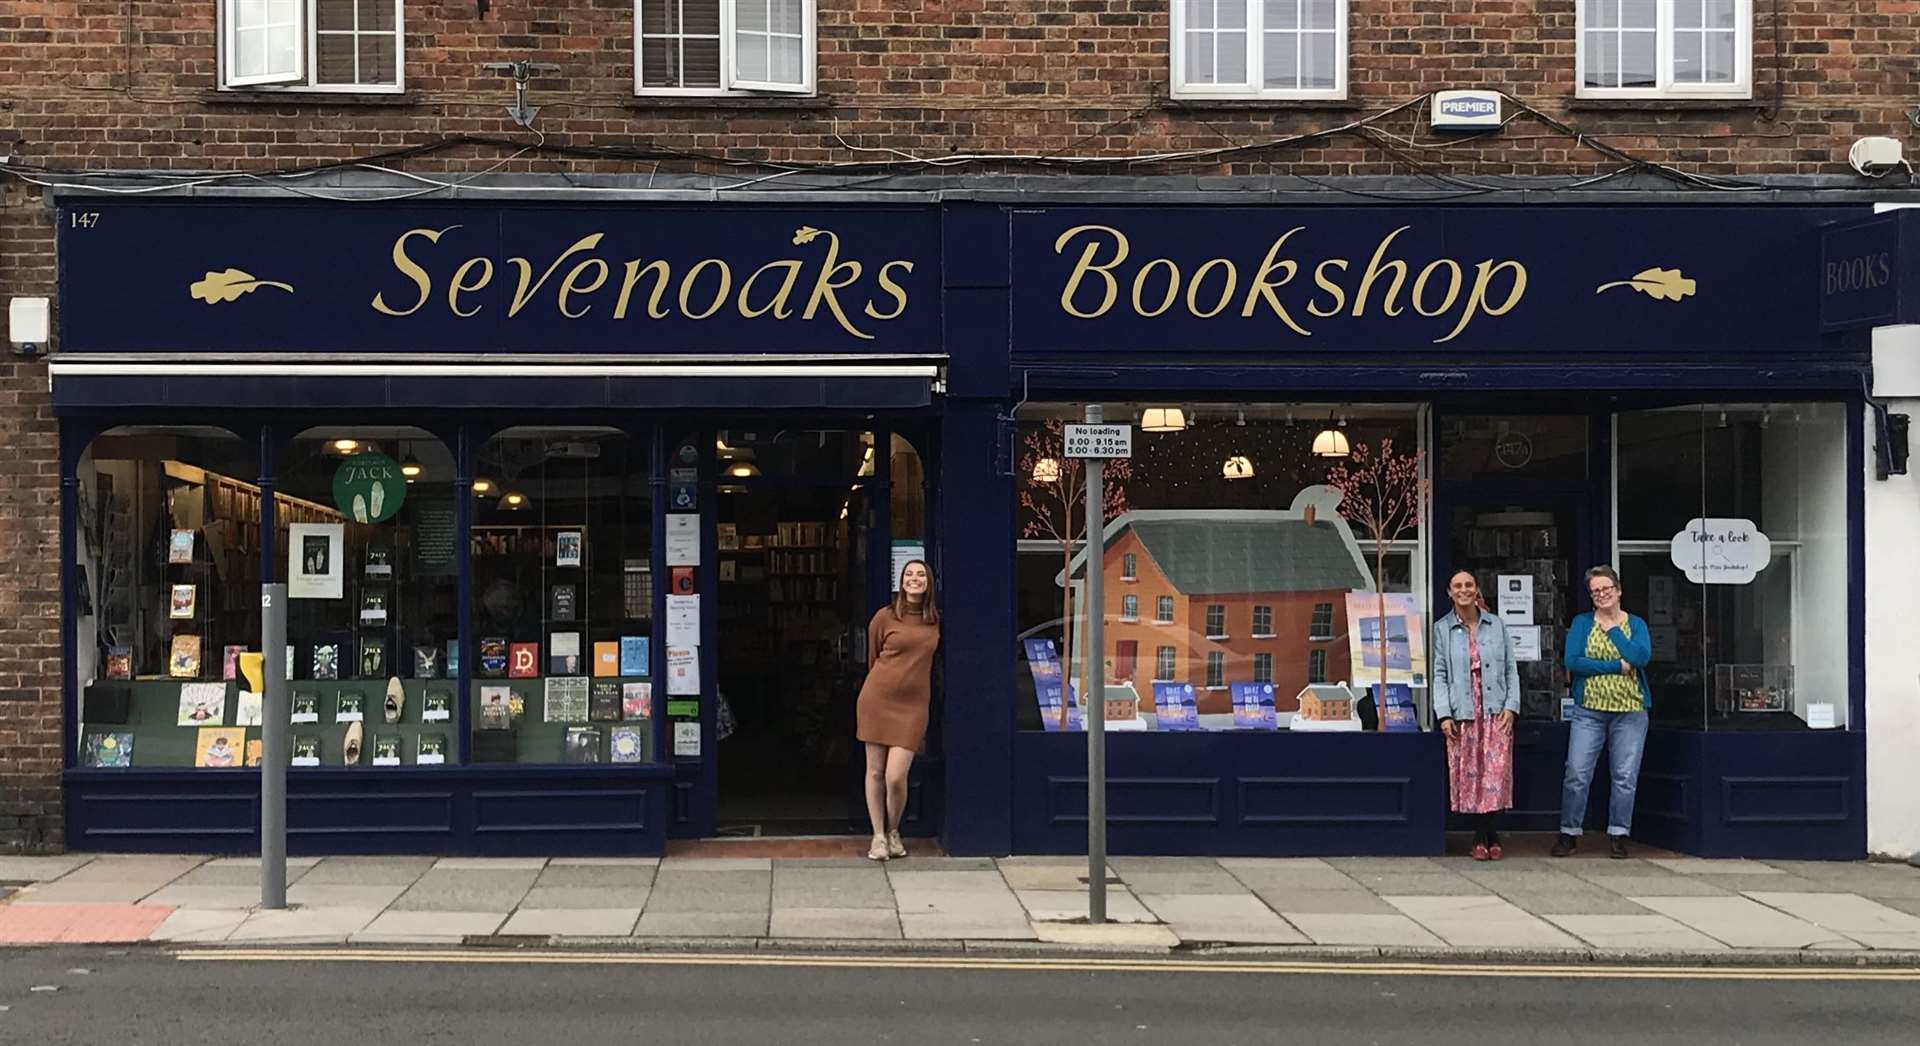 Sevenoaks Bookshop is the south east's independent bookshop of the year